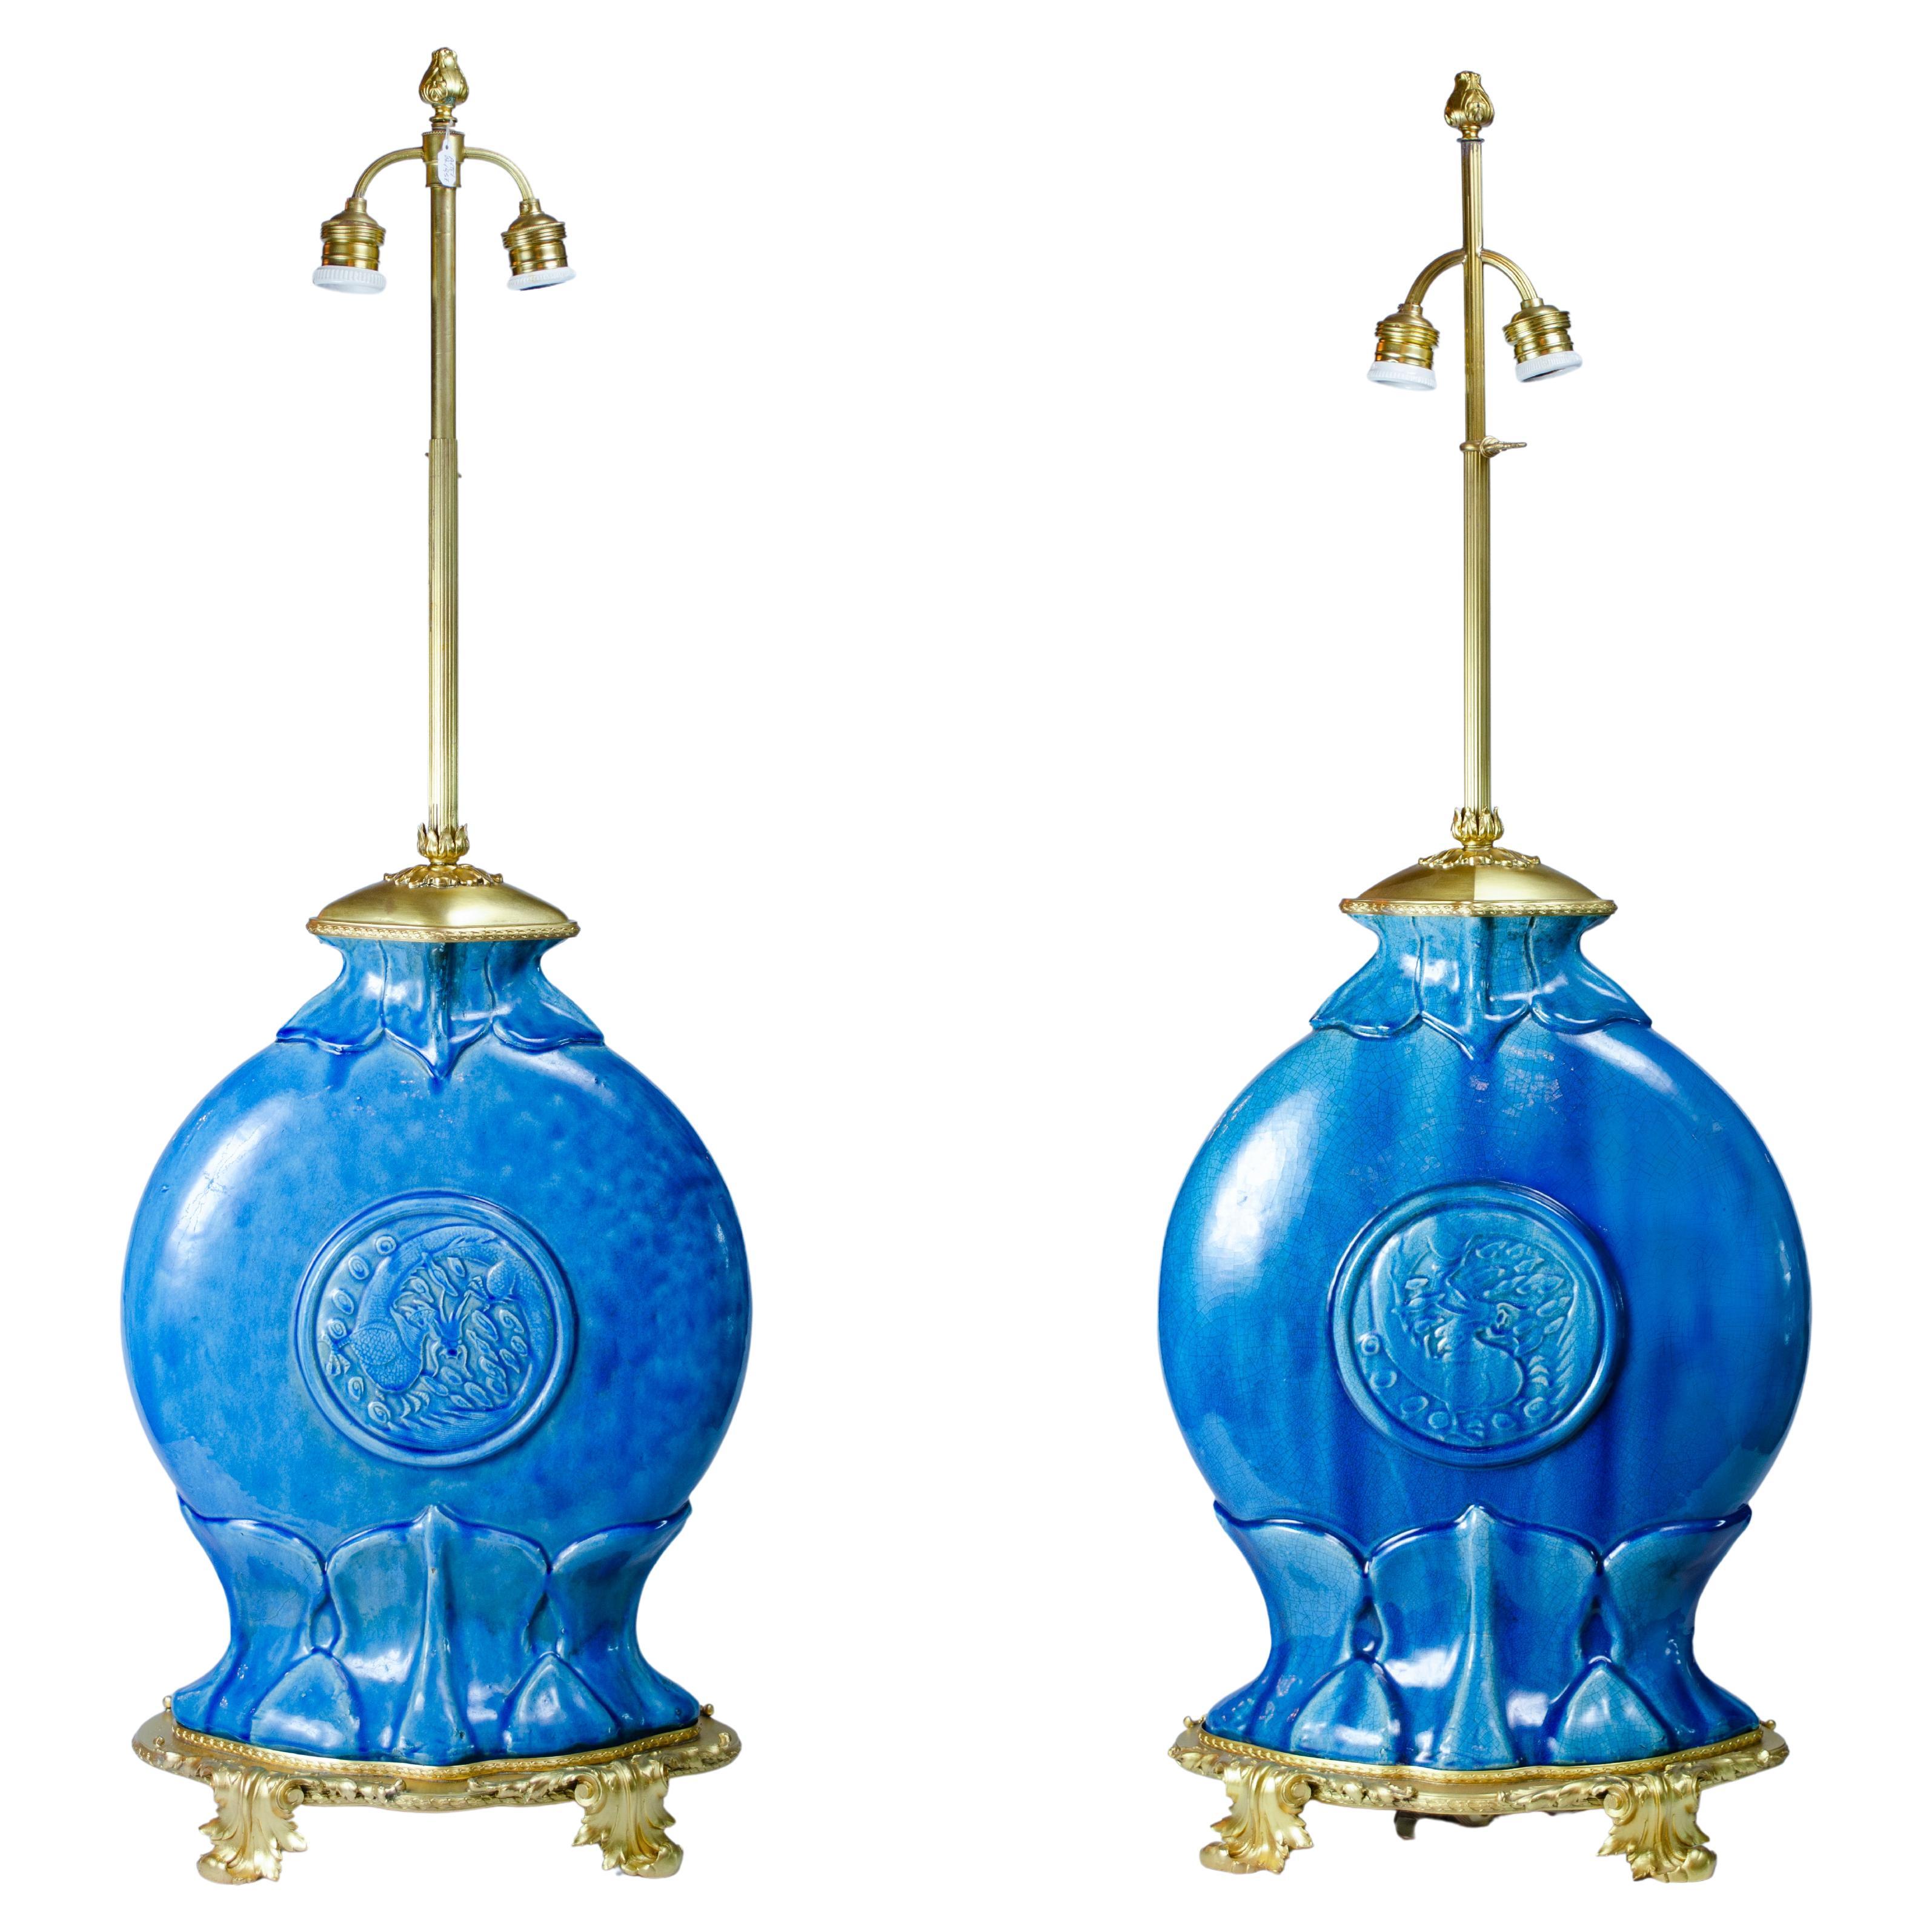 Pair of "Blue Glaze" Lamps Made by Theodore Deck